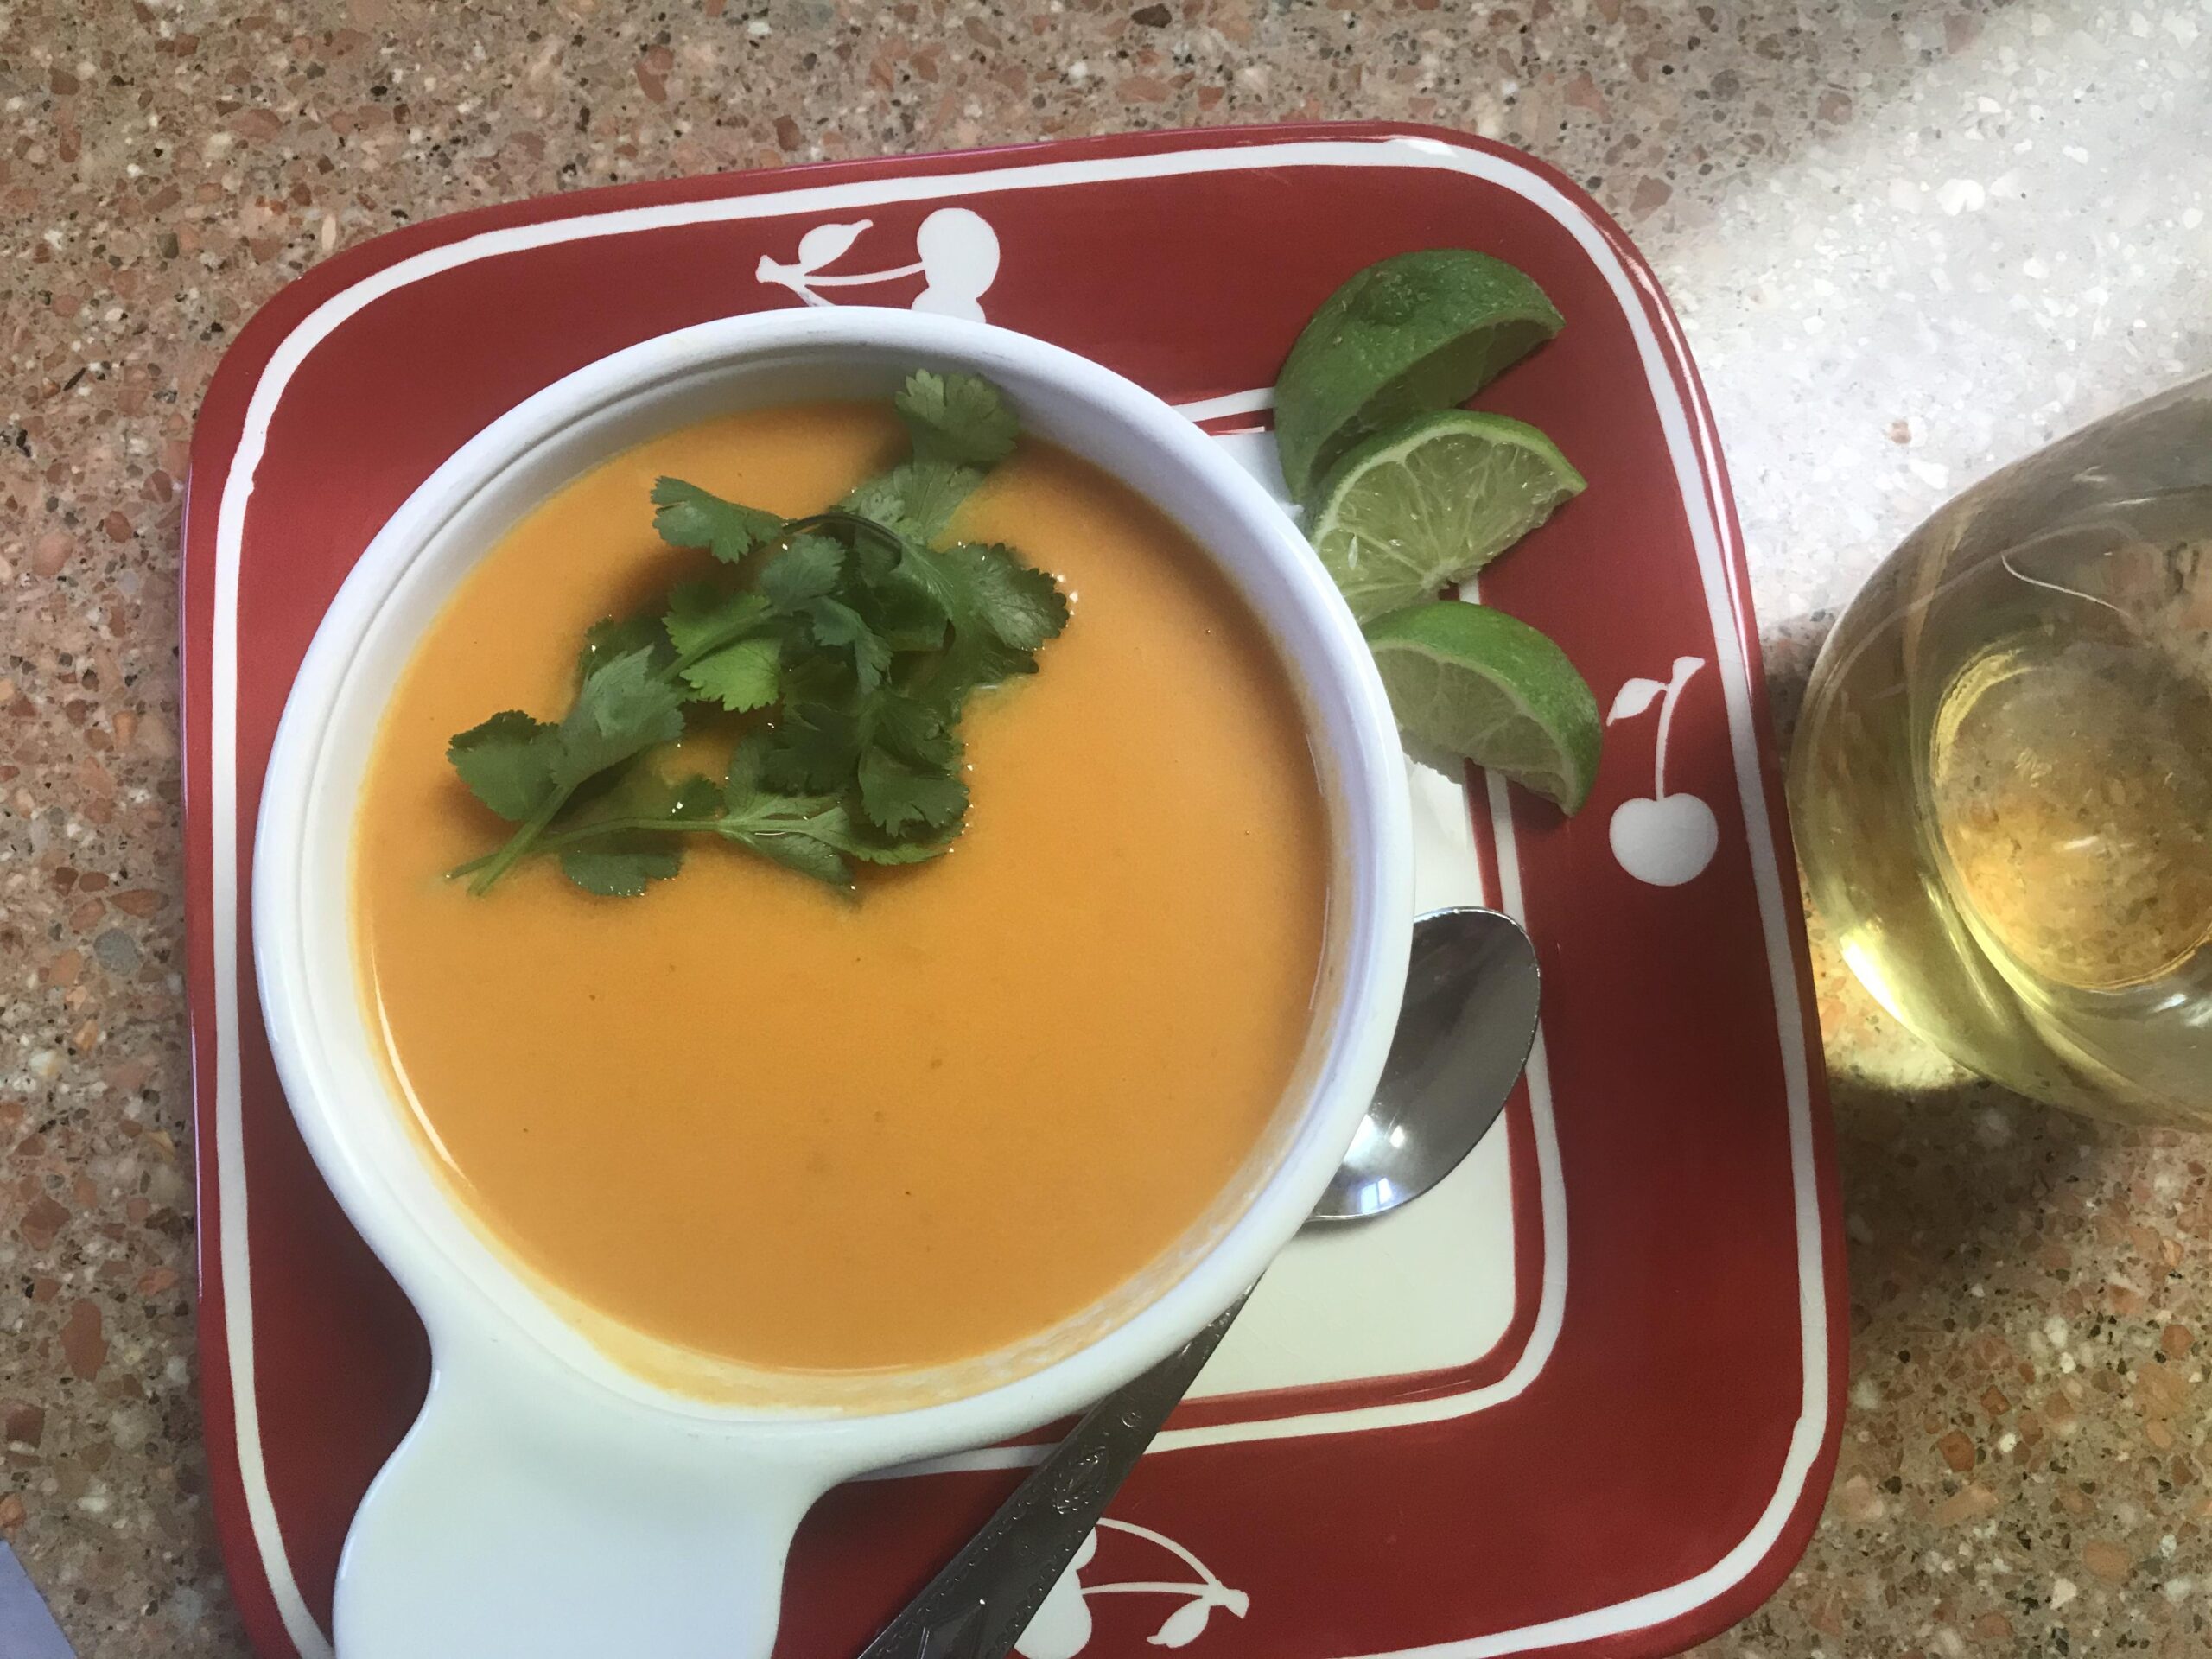 Creamy Carrot Ginger Soup Recipe – A Comforting Treat